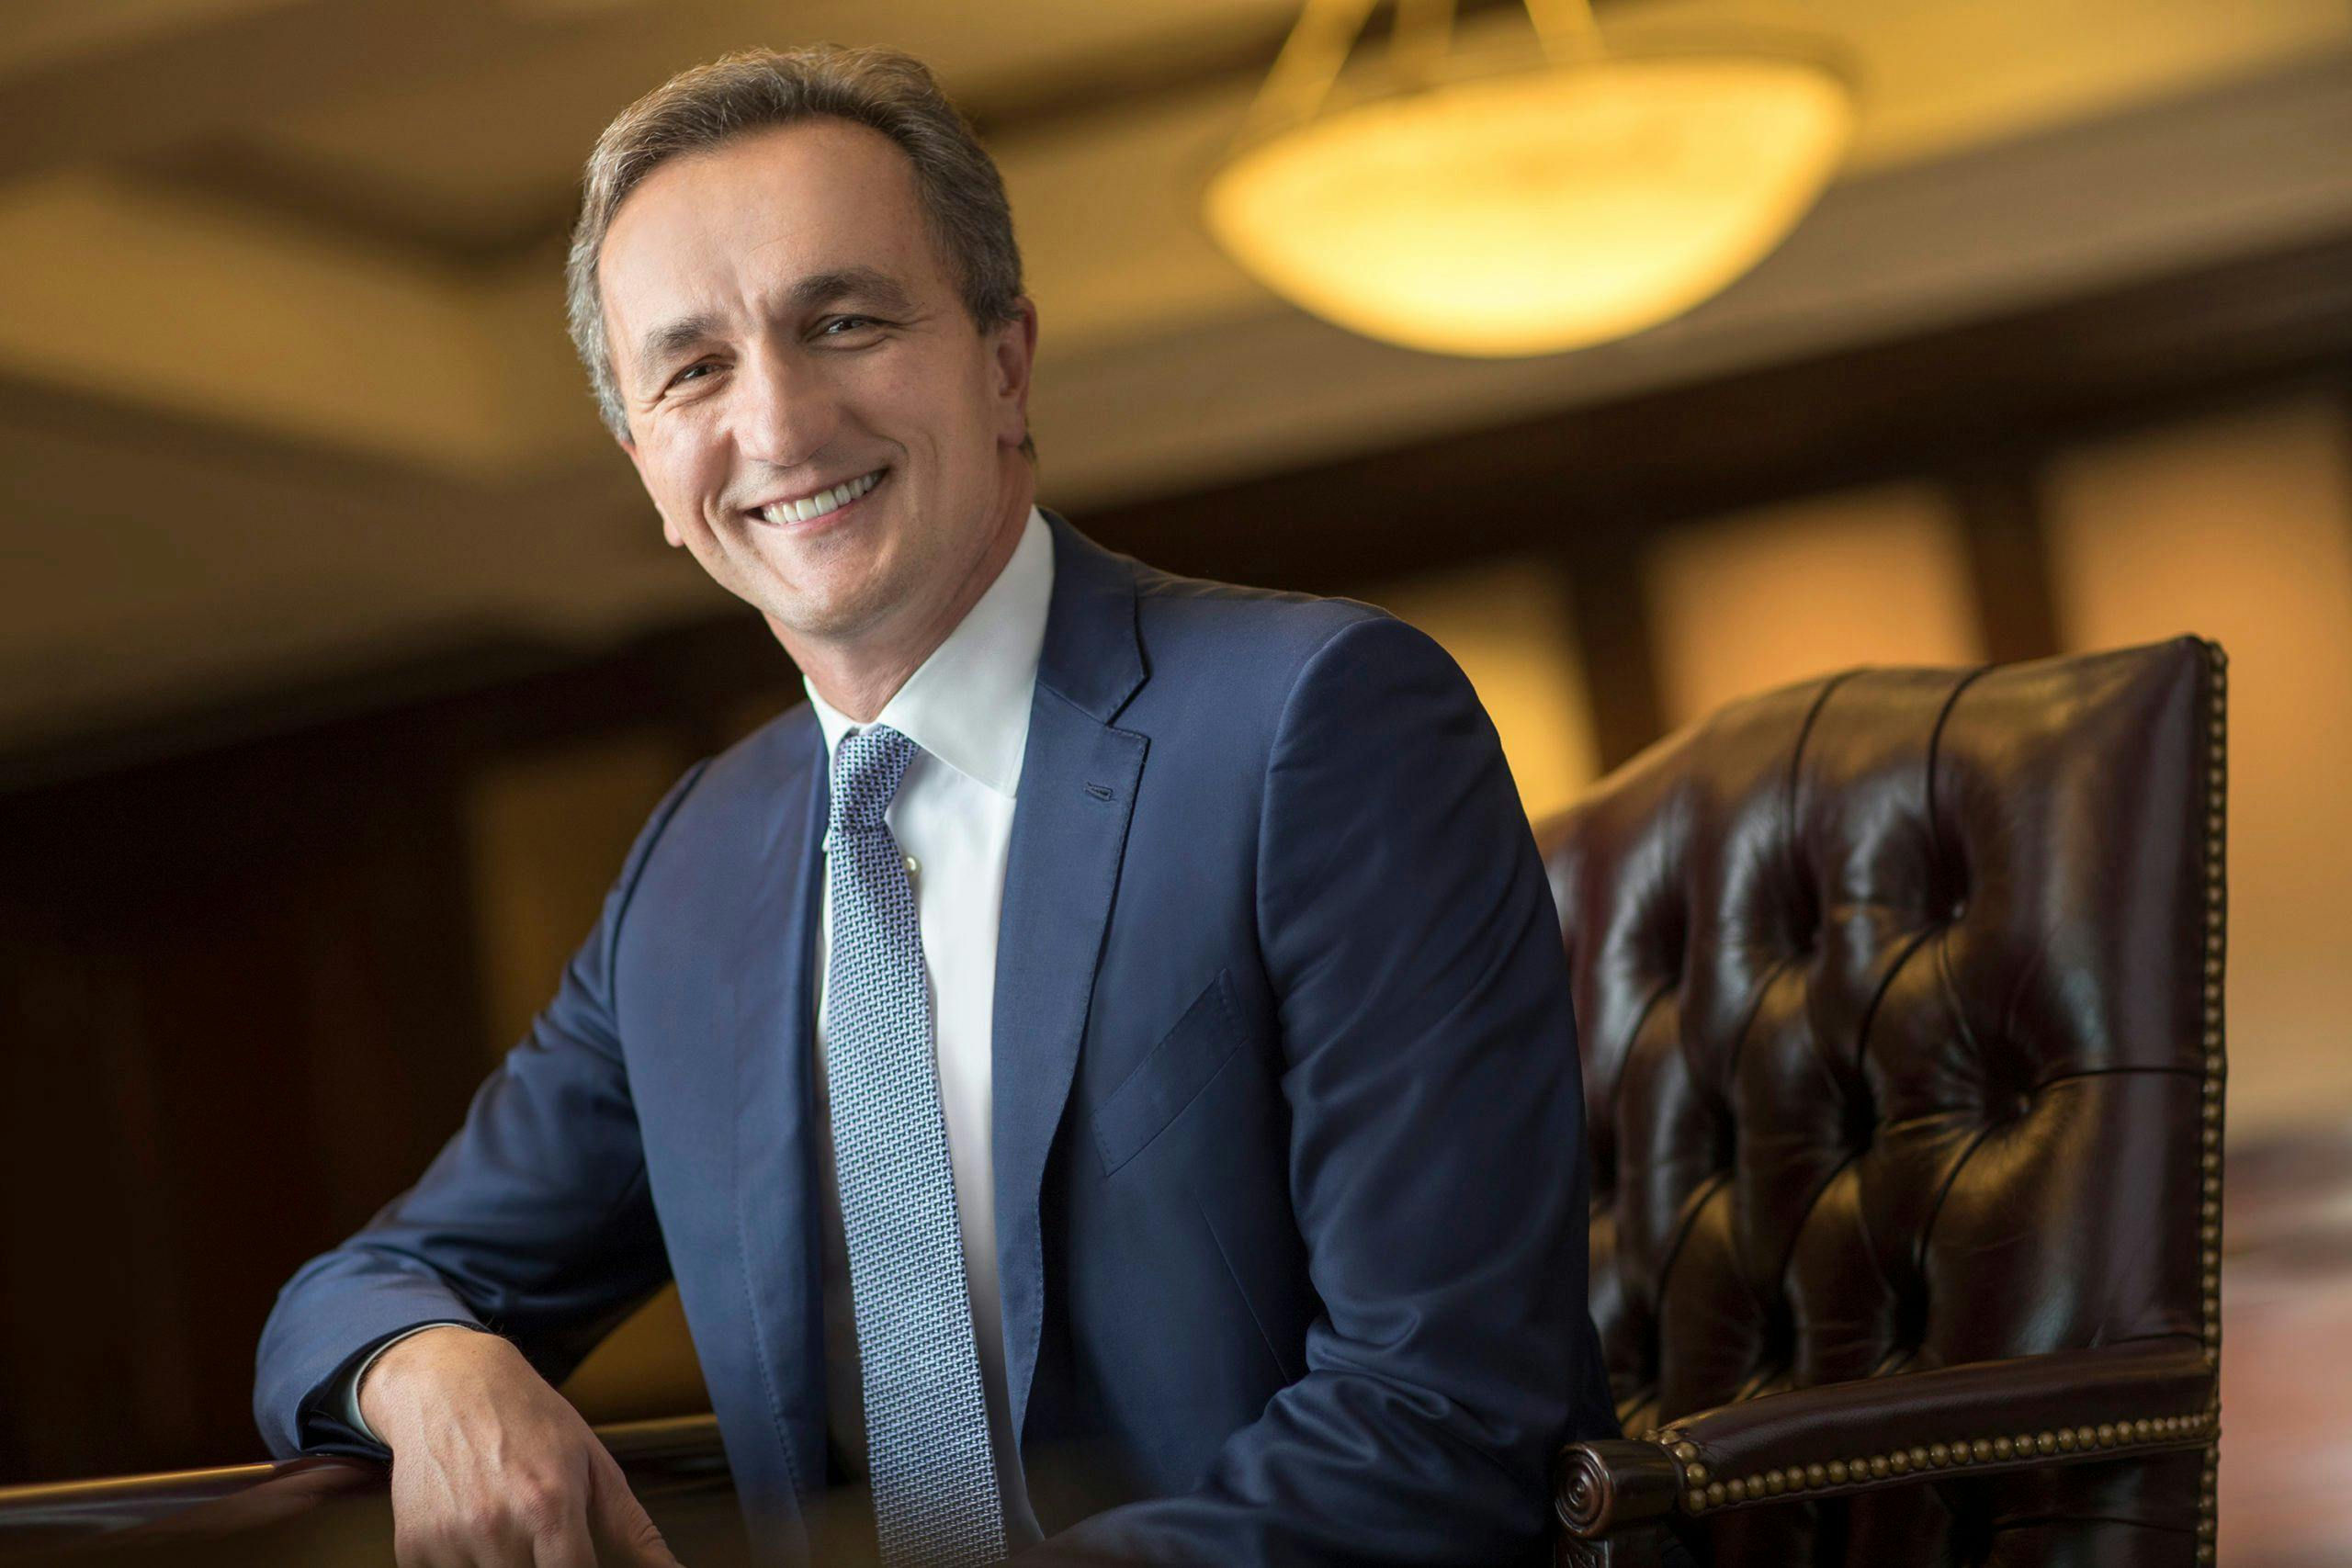 Tom Mihaljevic, president and CEO of the Cleveland Clinic (photo by Cleveland Clinic)